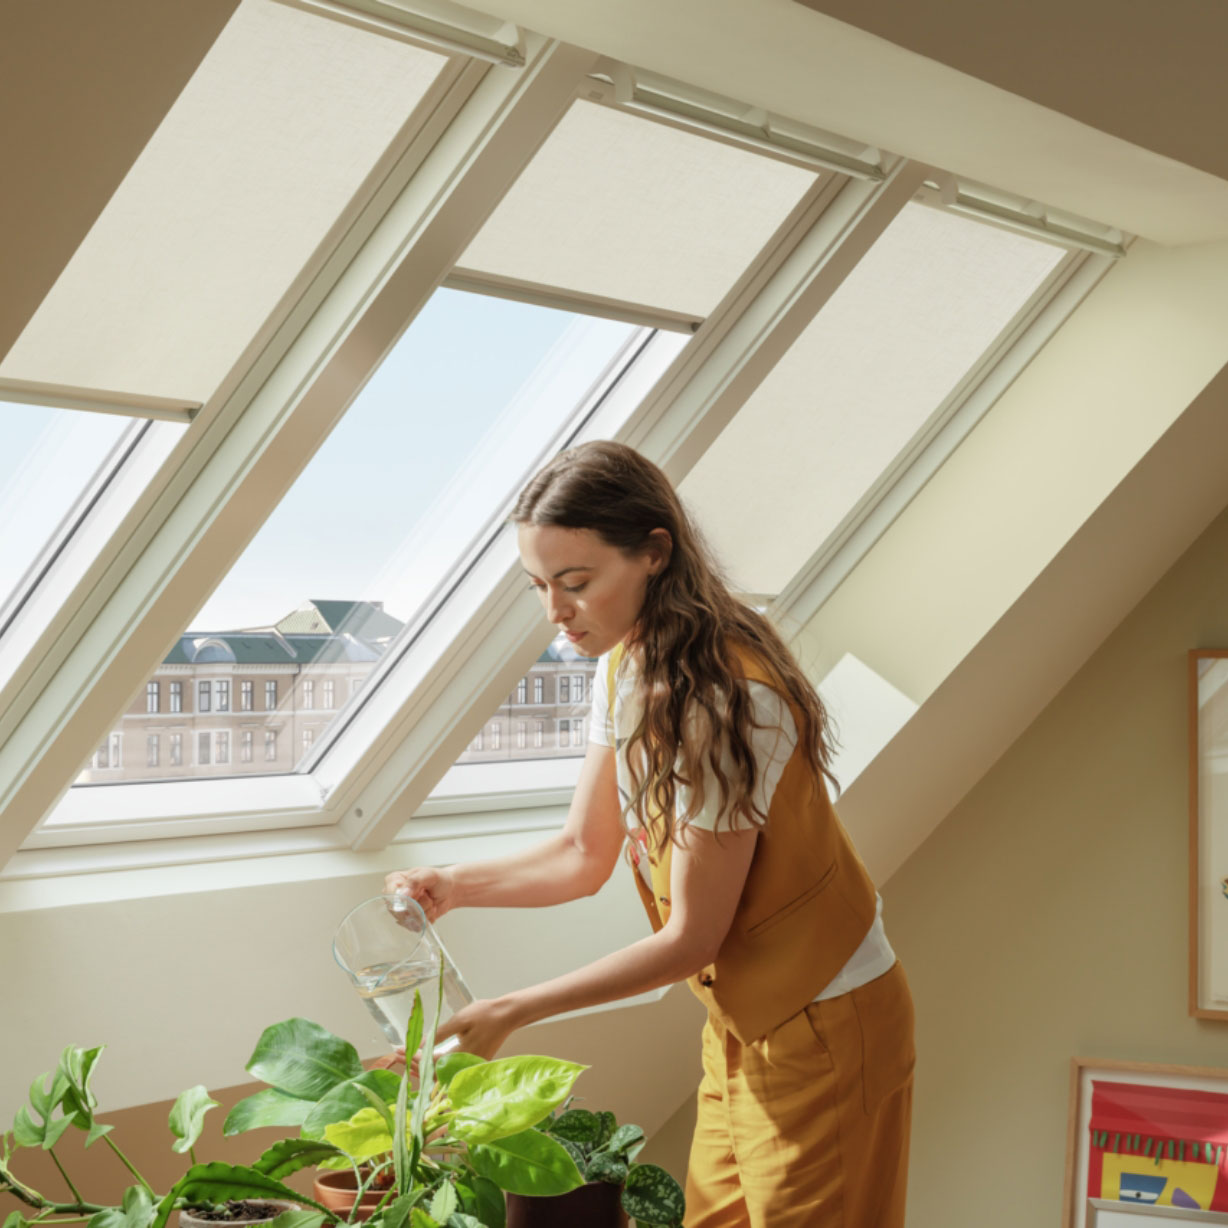 Woman watering houseplants under neutral Velux blinds